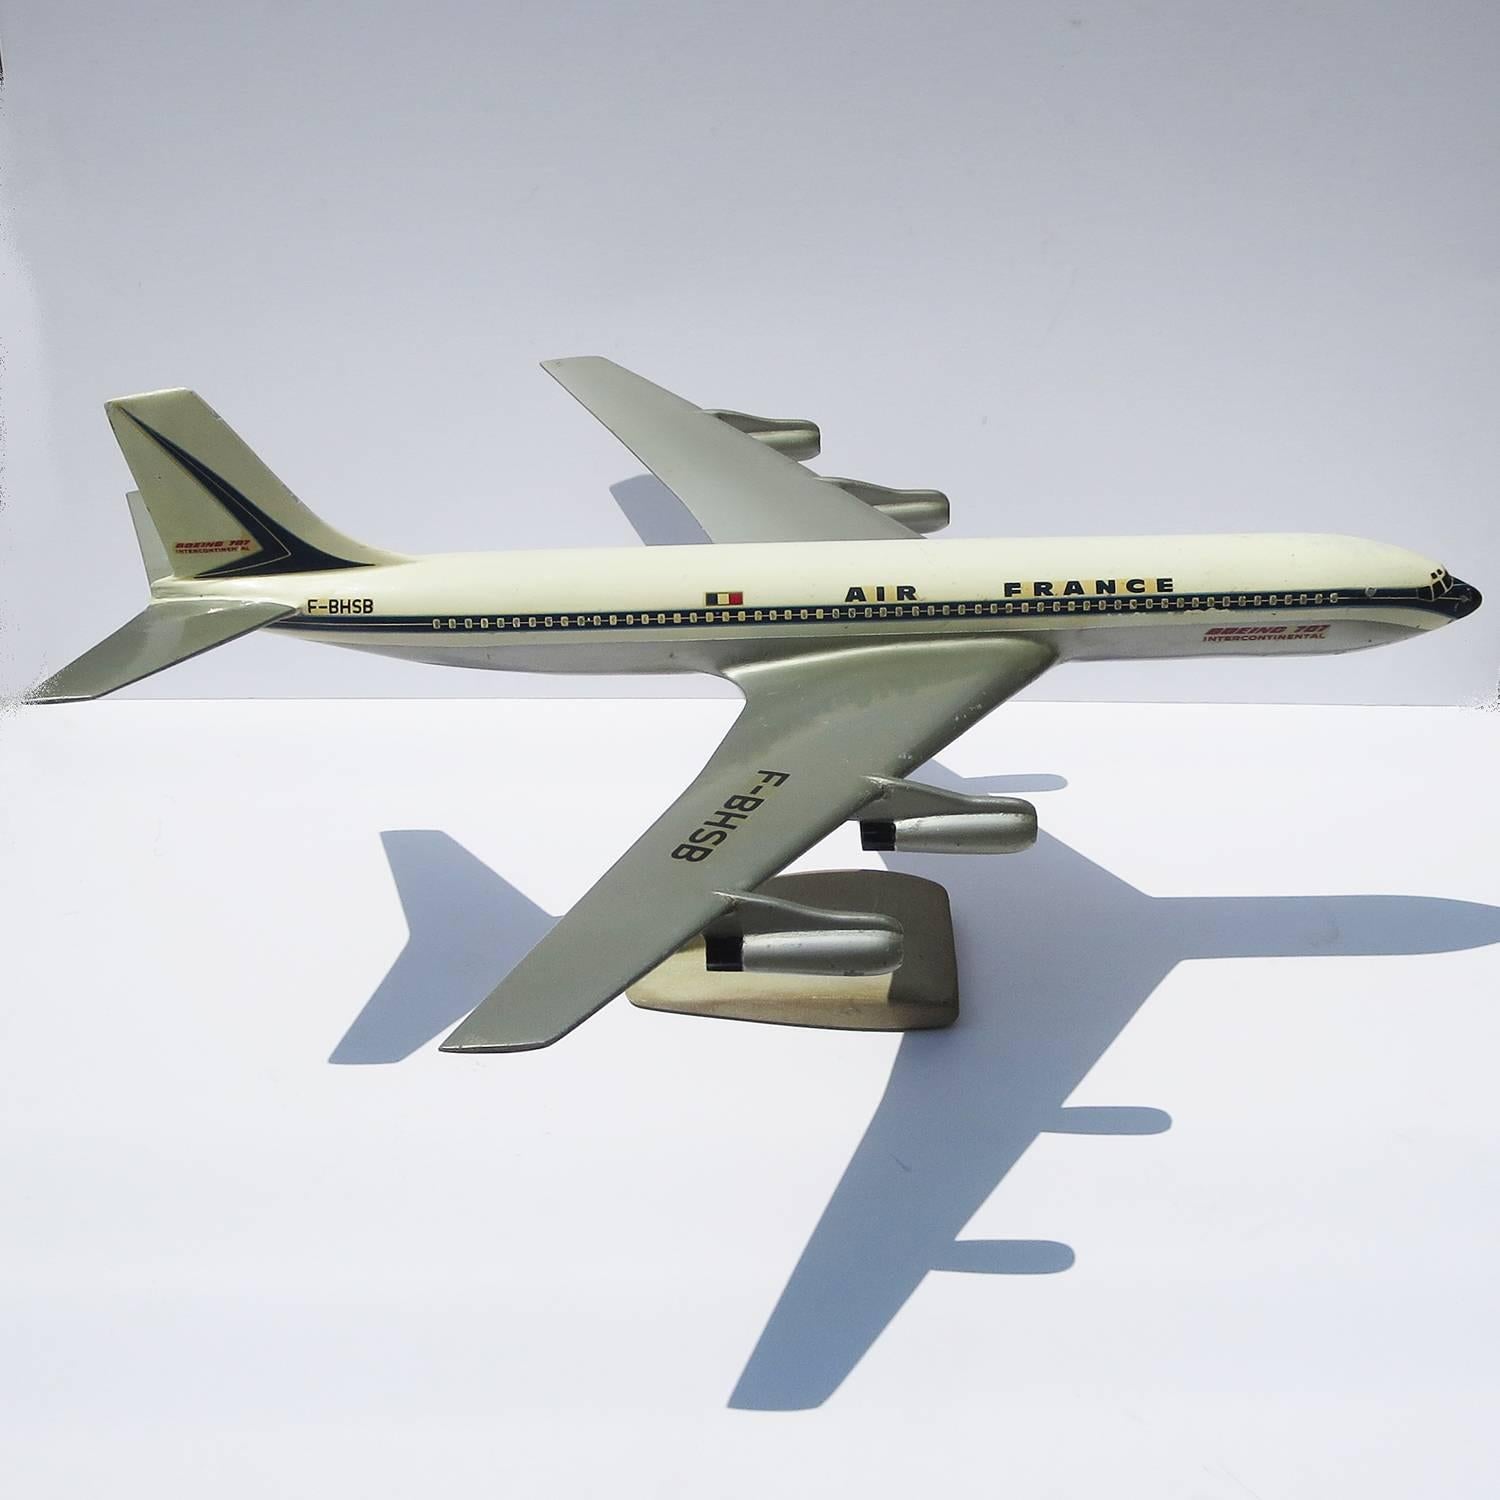 Introduced by Boeing in 1958, the 707 ushered in the age of commercial jet travel. Our model was used in travel agencies or executive offices to promote the jet, as flown by Air France. Painted metal aircraft models were a costly advertisement and